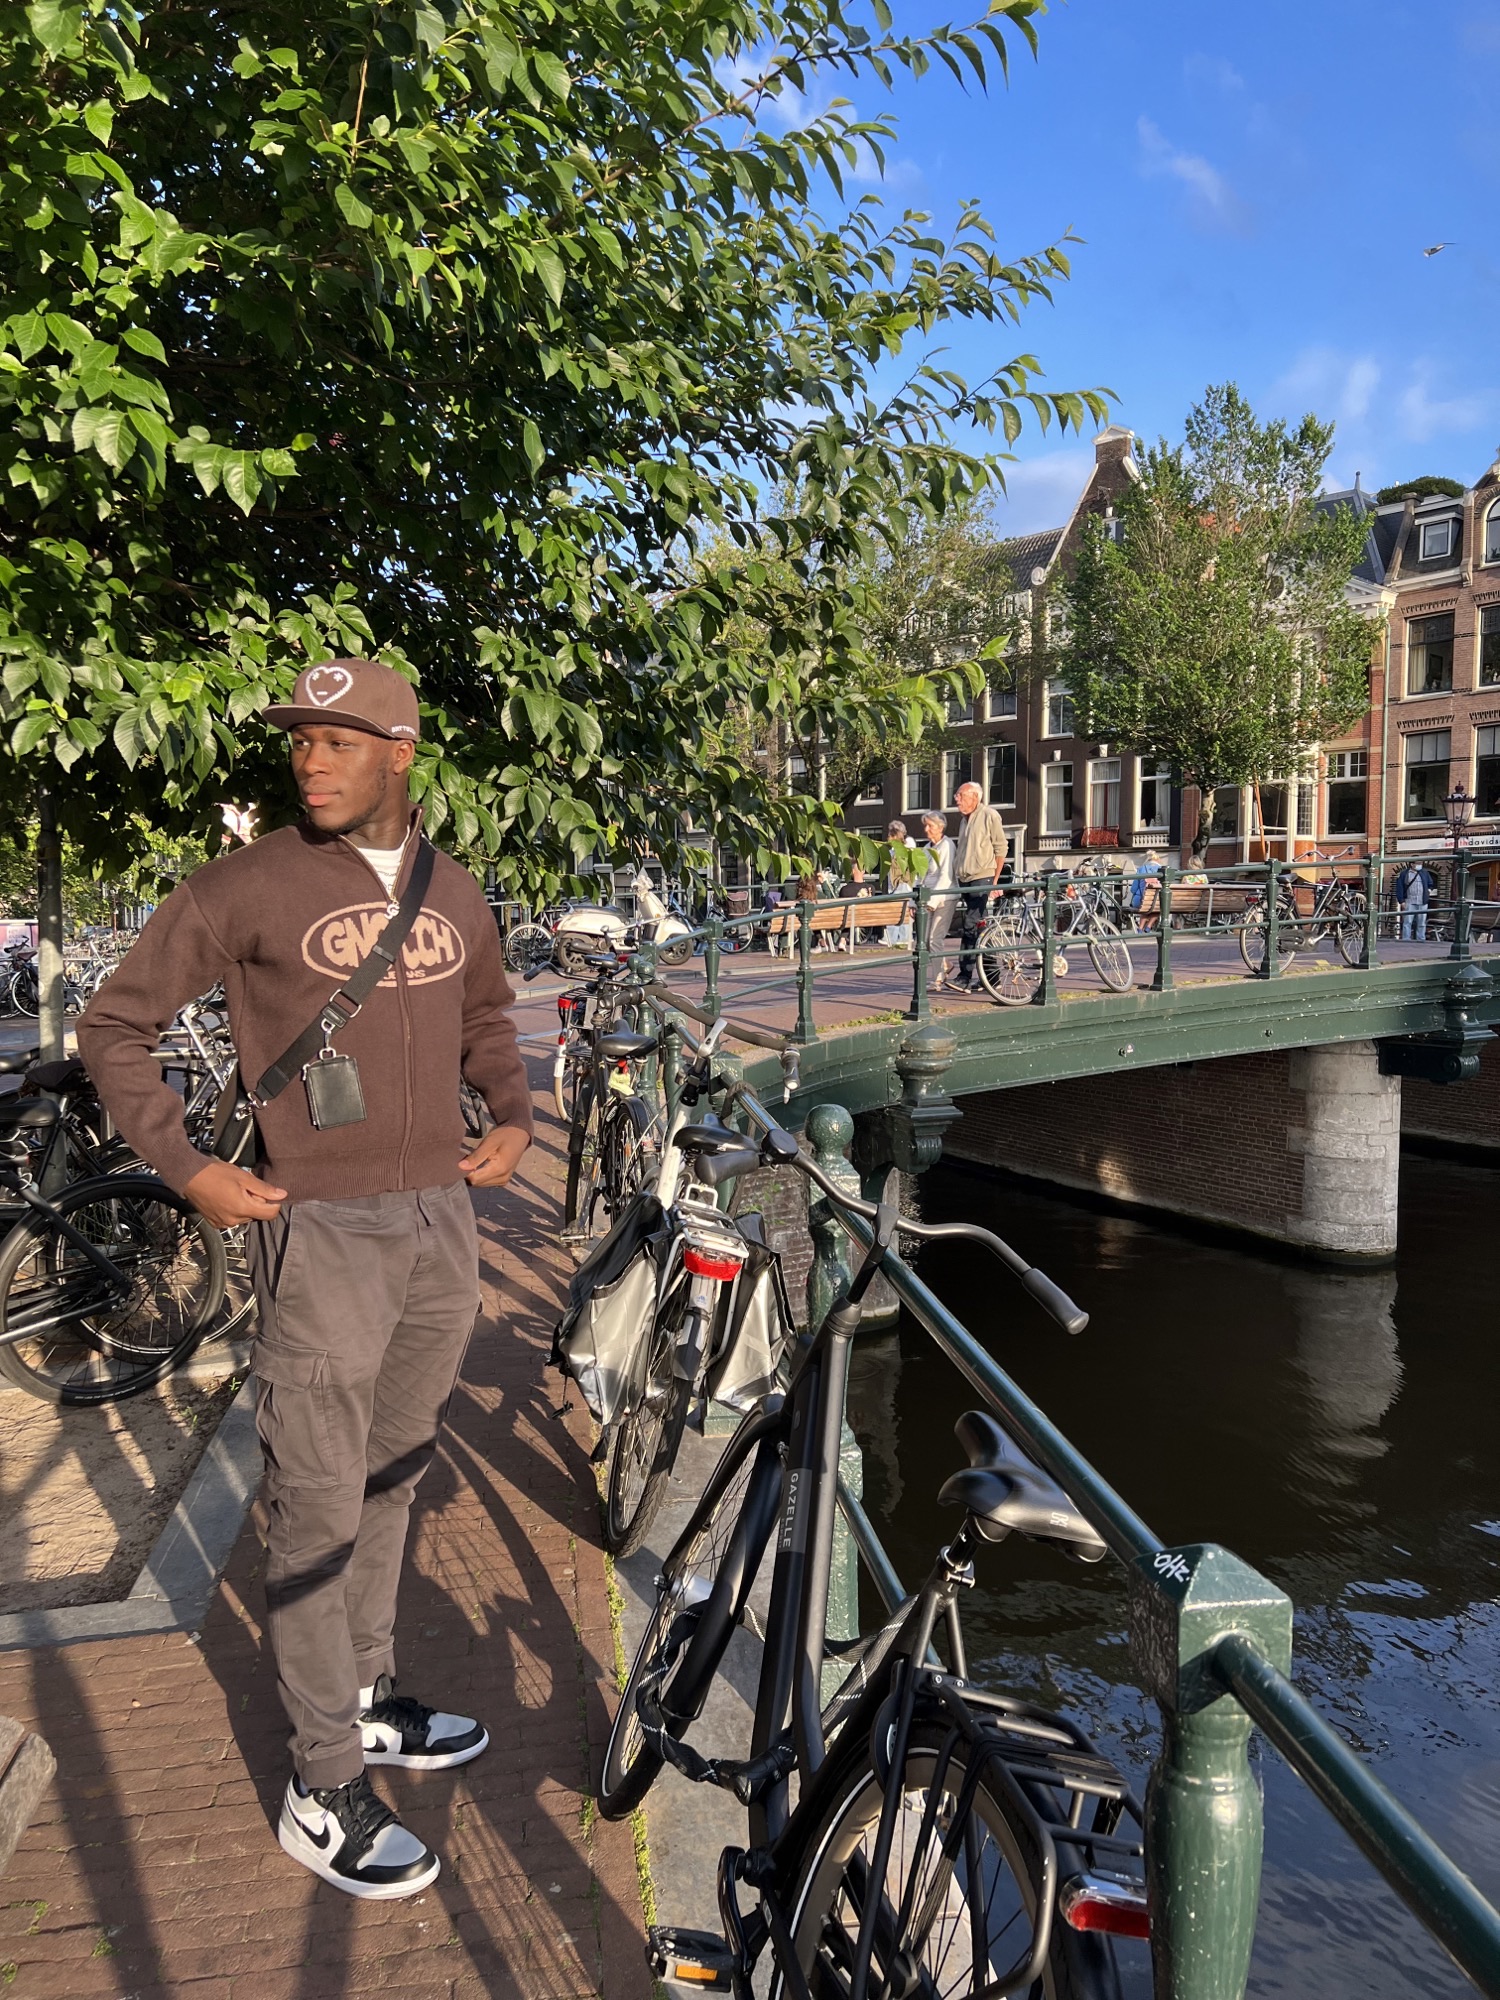 Ayo stood in front of a bridge with bikes